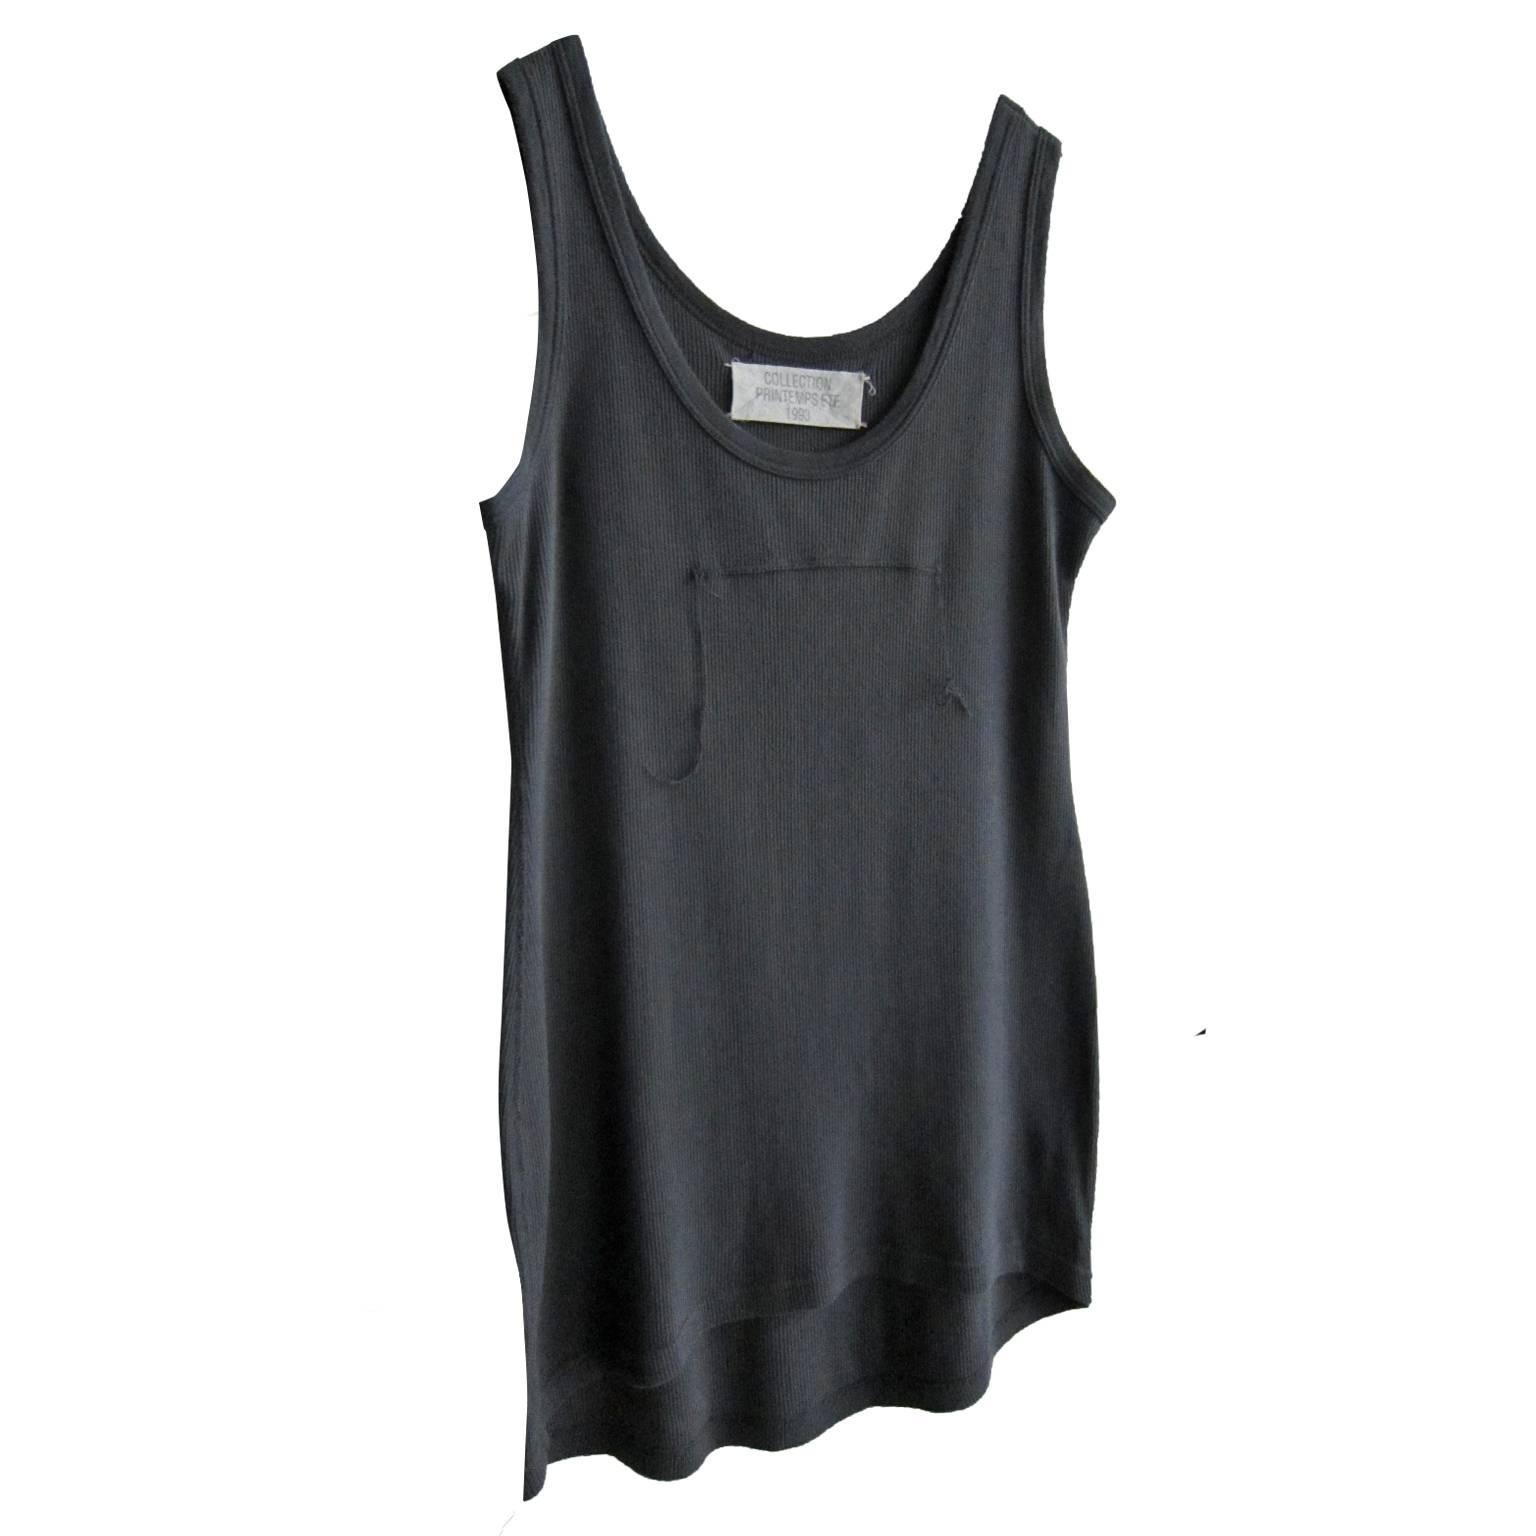 Martin Margiela small rib grey tank SS 1993 / AW 1994.
With exposed dart detail on front. 